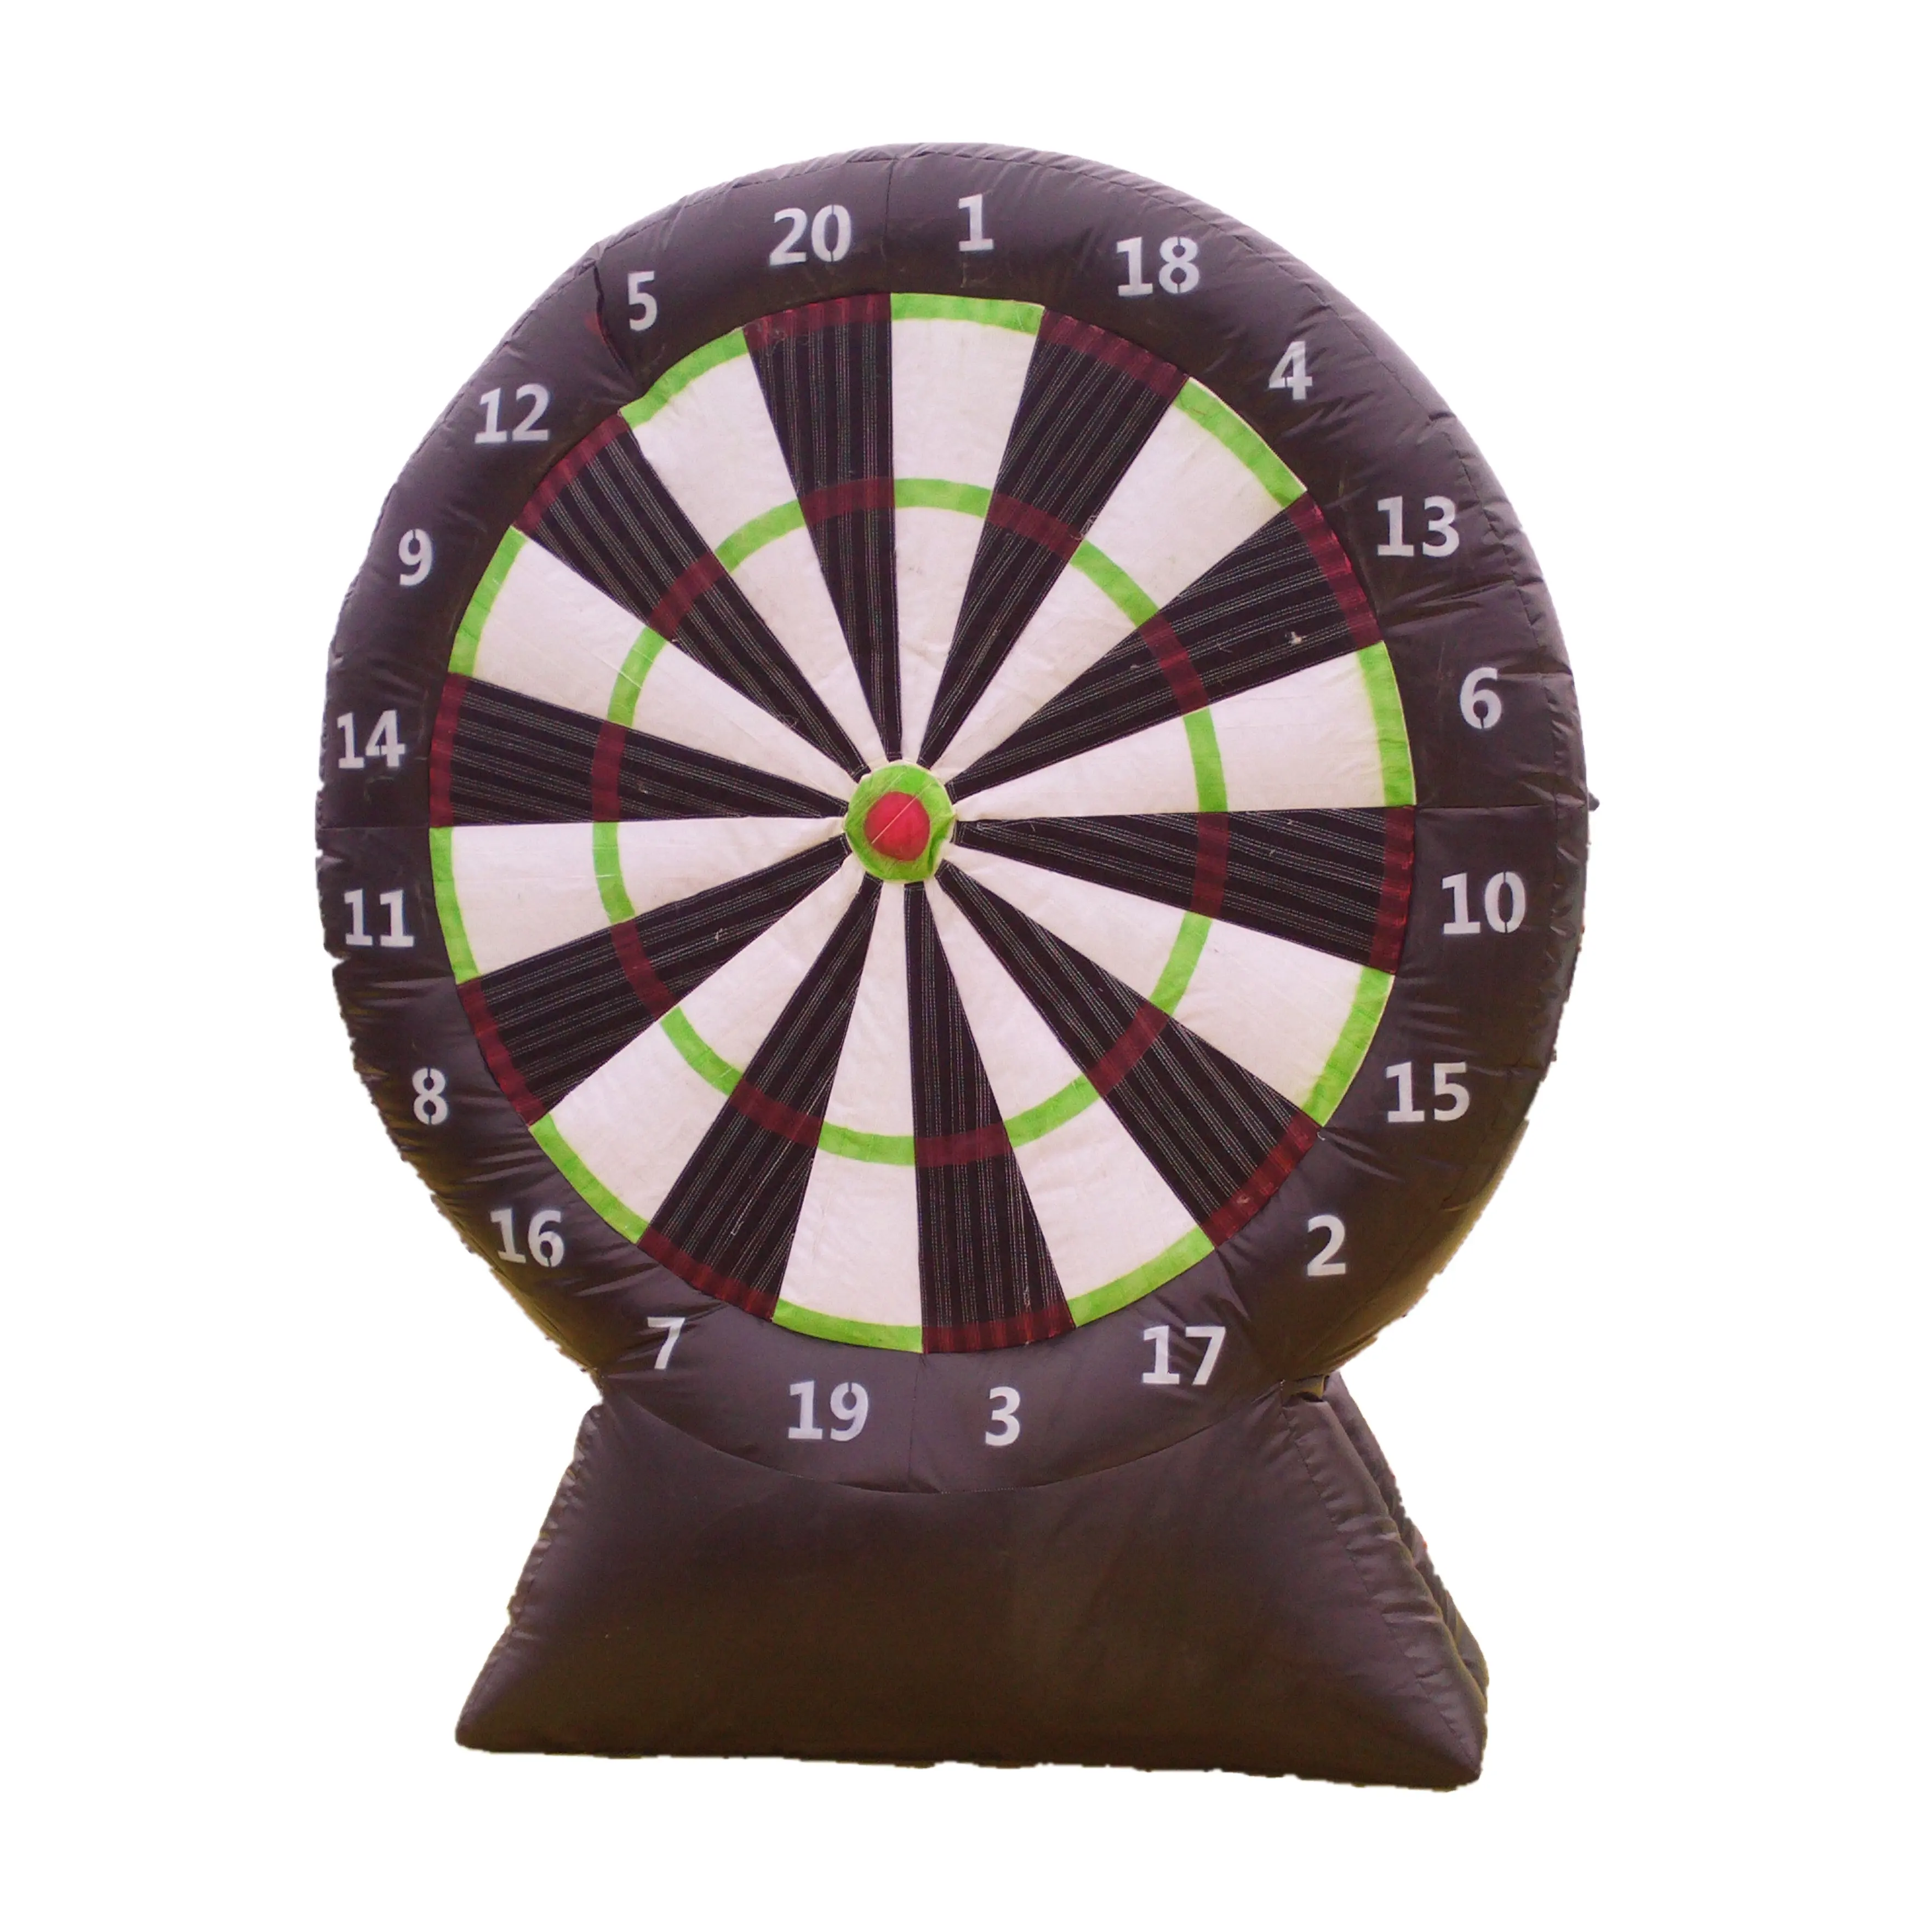 Free Shipping High Quality 3m High Inflatable Football Dart Board Game